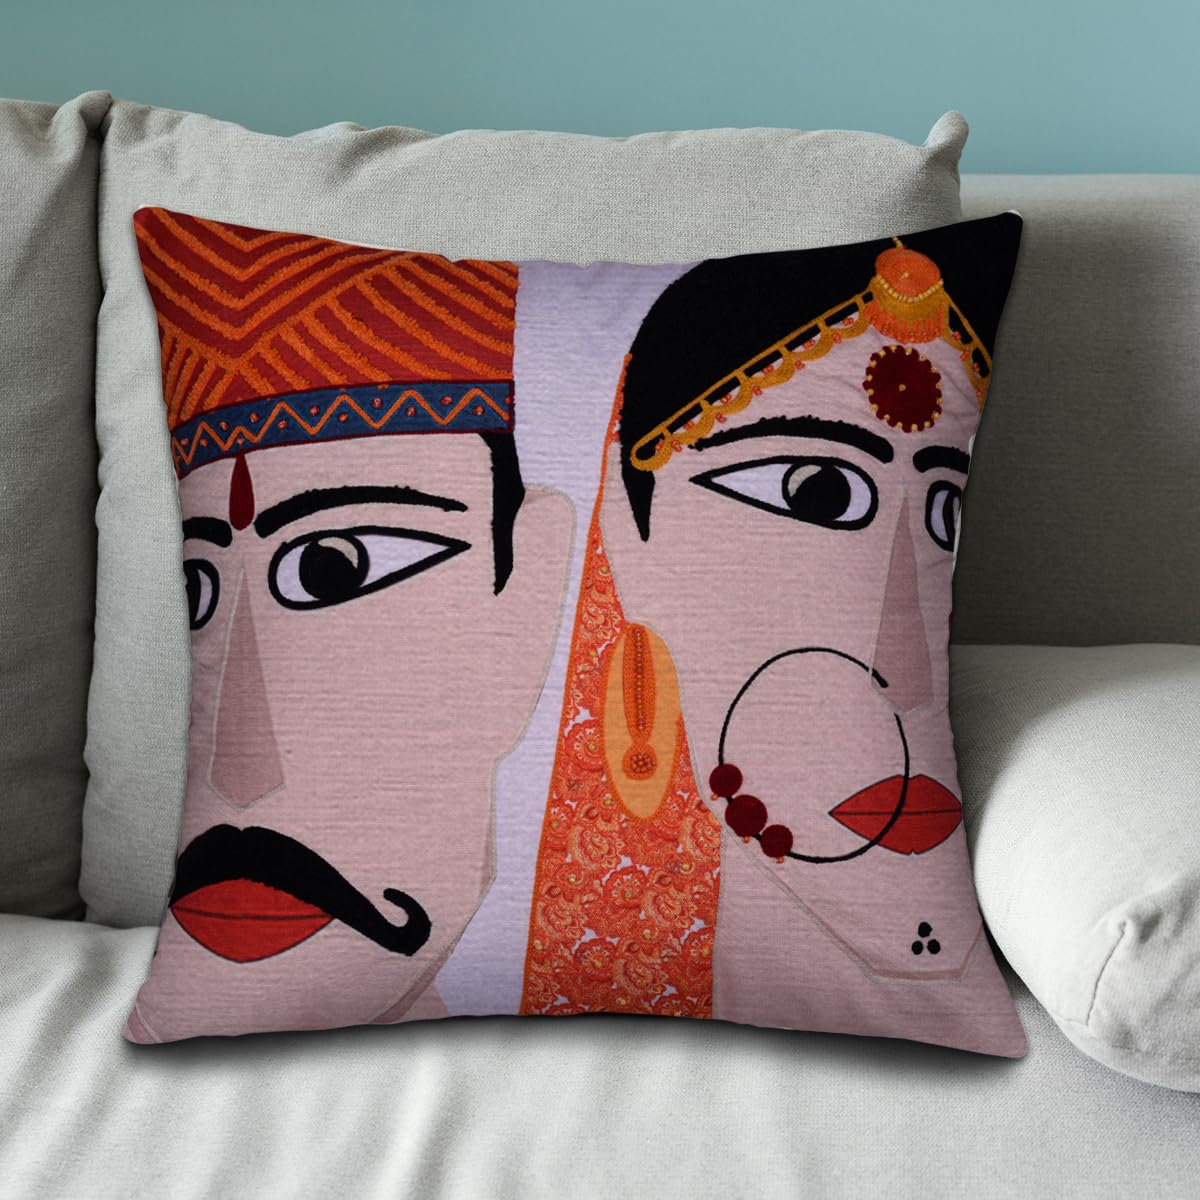 Man and Woman Printed Design Throw Pillow Covers - Decozen